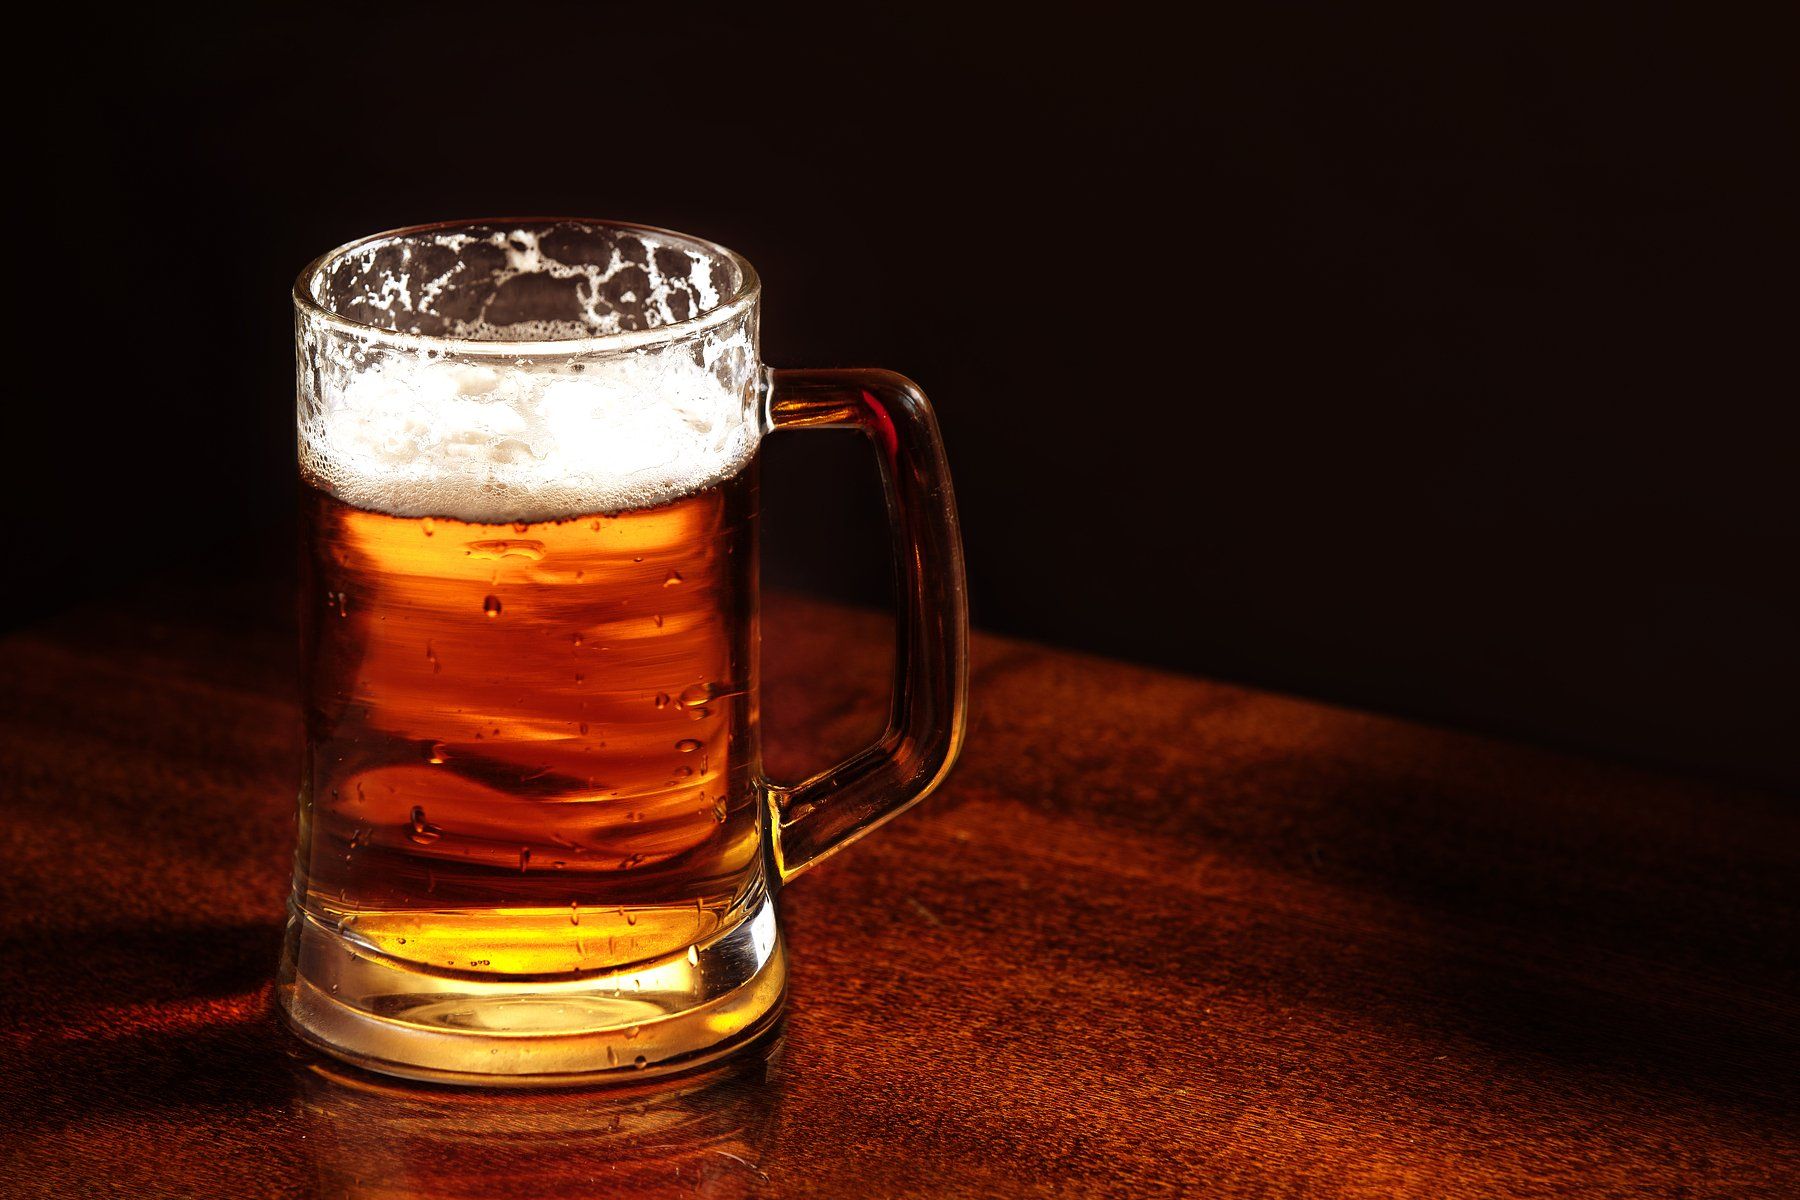 drinks, alcohol, mug, beer, table, glass, frothy, material, pint, wood, lager, cold, yellow, gold, establishment, dark, bubble, food, liquid, horizontal, still, color, close-up, object, backgrounds, freshness, single, space, refreshment, pouring, full, fo, Матвеев Александр